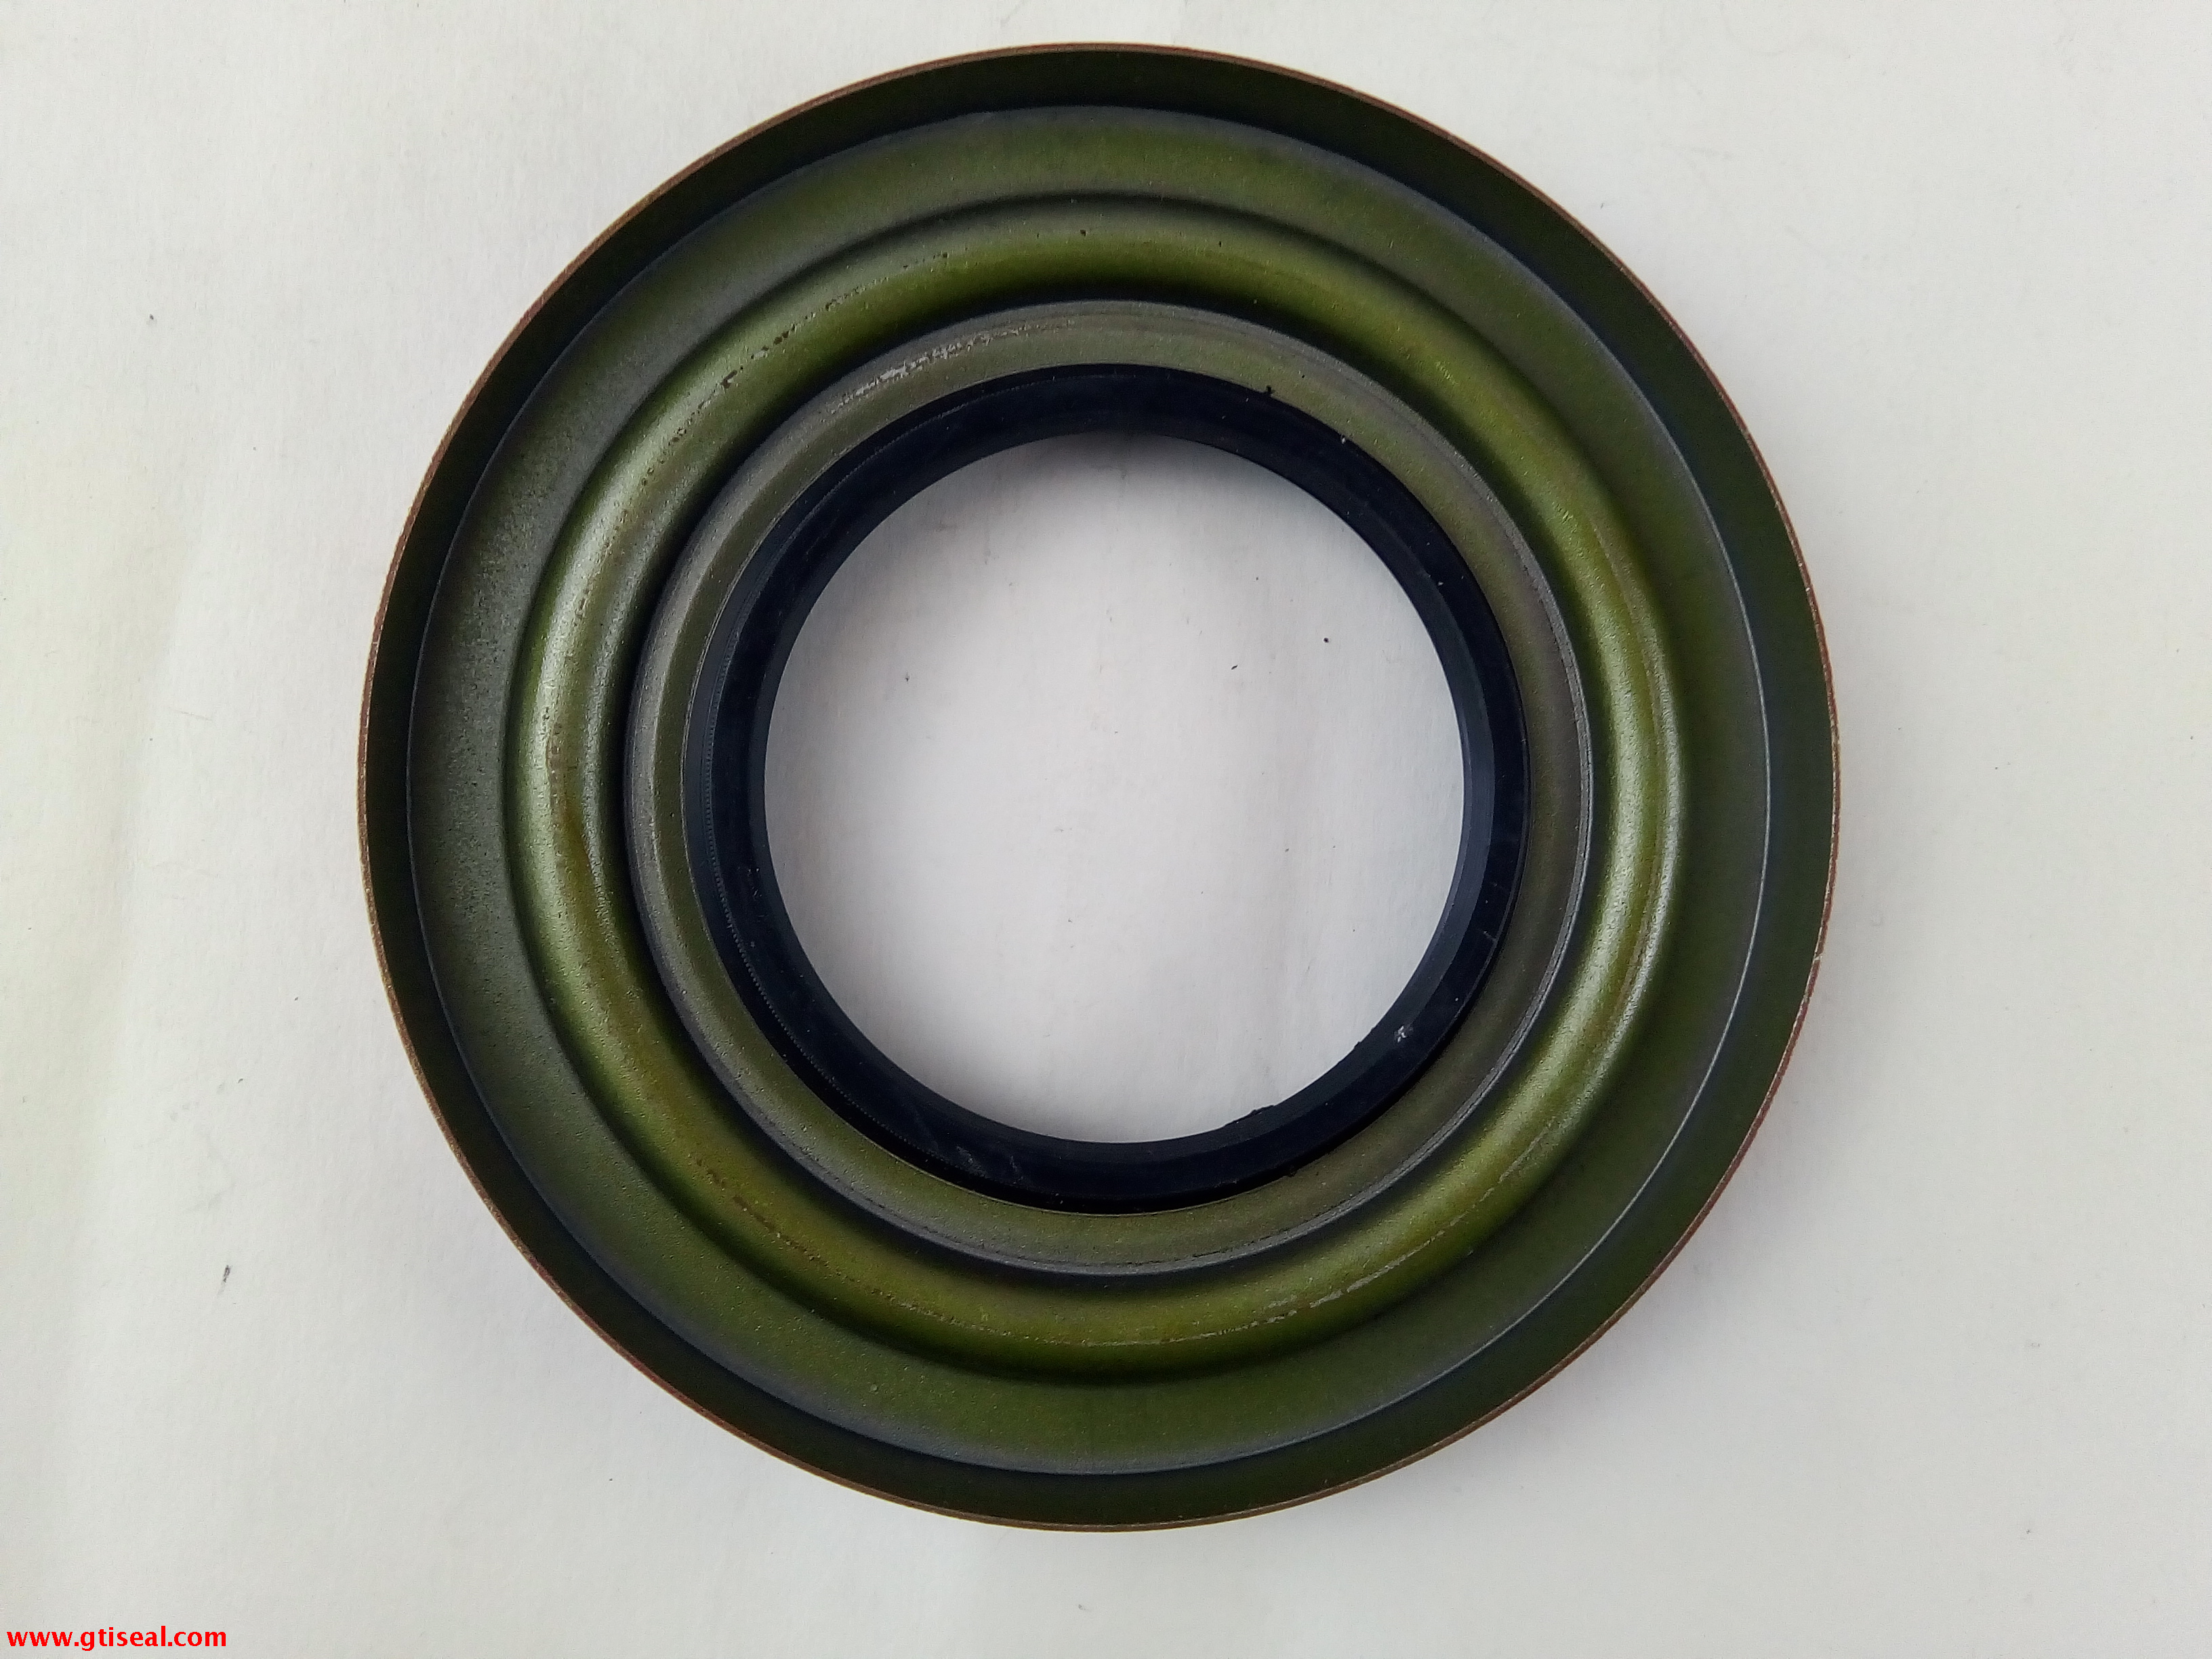 hot selling Products TCN Hydraulic pump Oil Seal